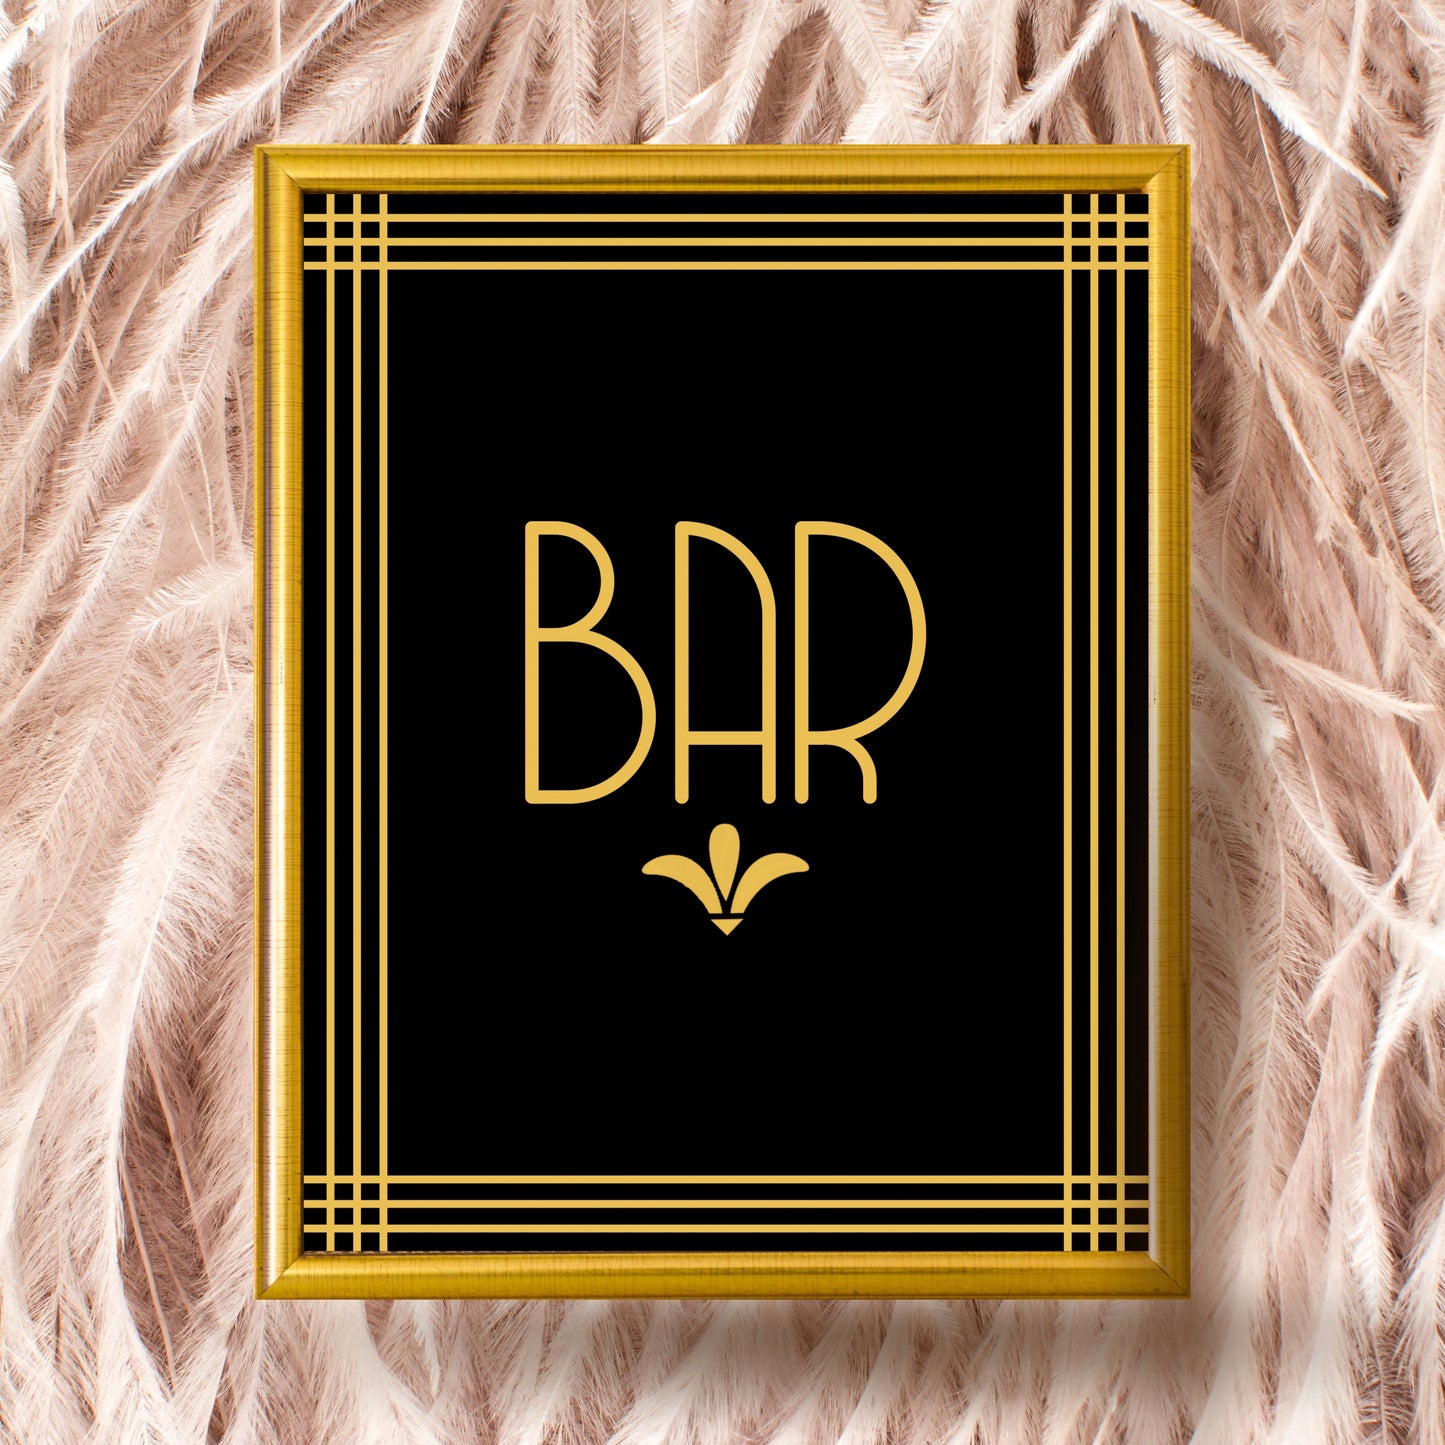 "Bar" Printable Party Sign For Great Gatsby Or Roaring 20's Party Or Wedding, Black & Gold, Printable Party Decor